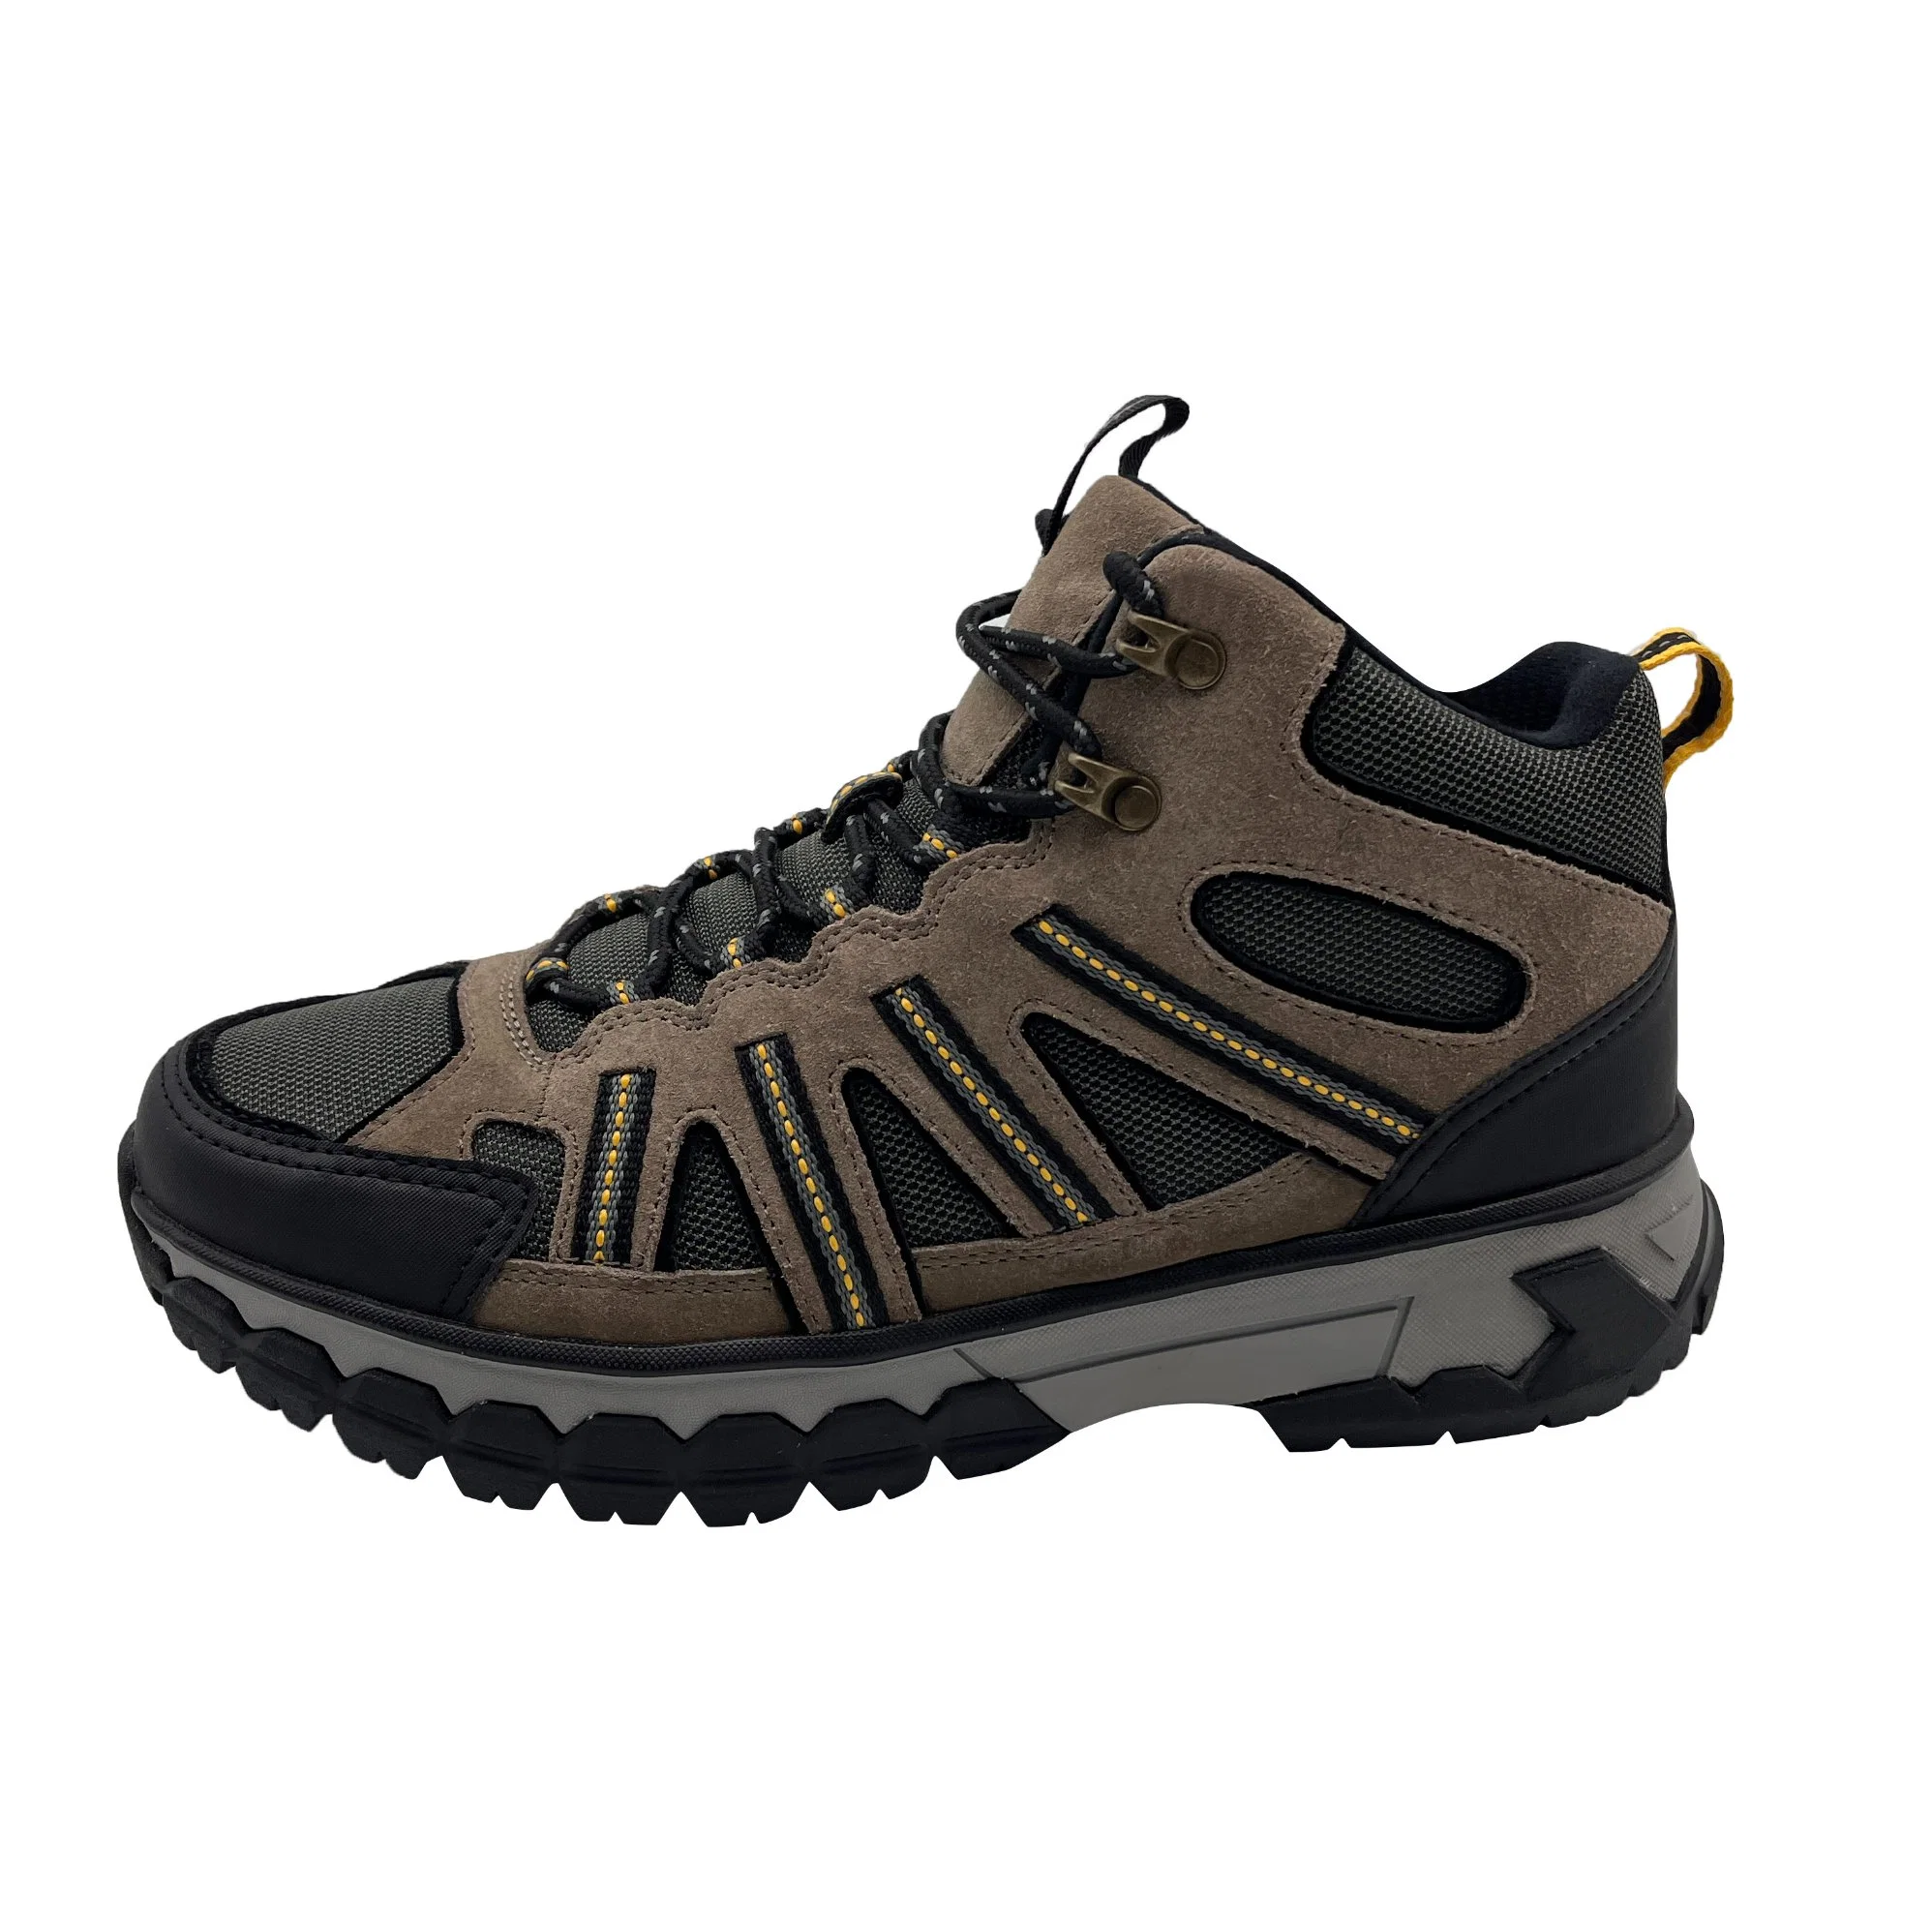 Outdoor Hiking Shoes Wholesale Brand Lightweight Sports Trainers Antislip